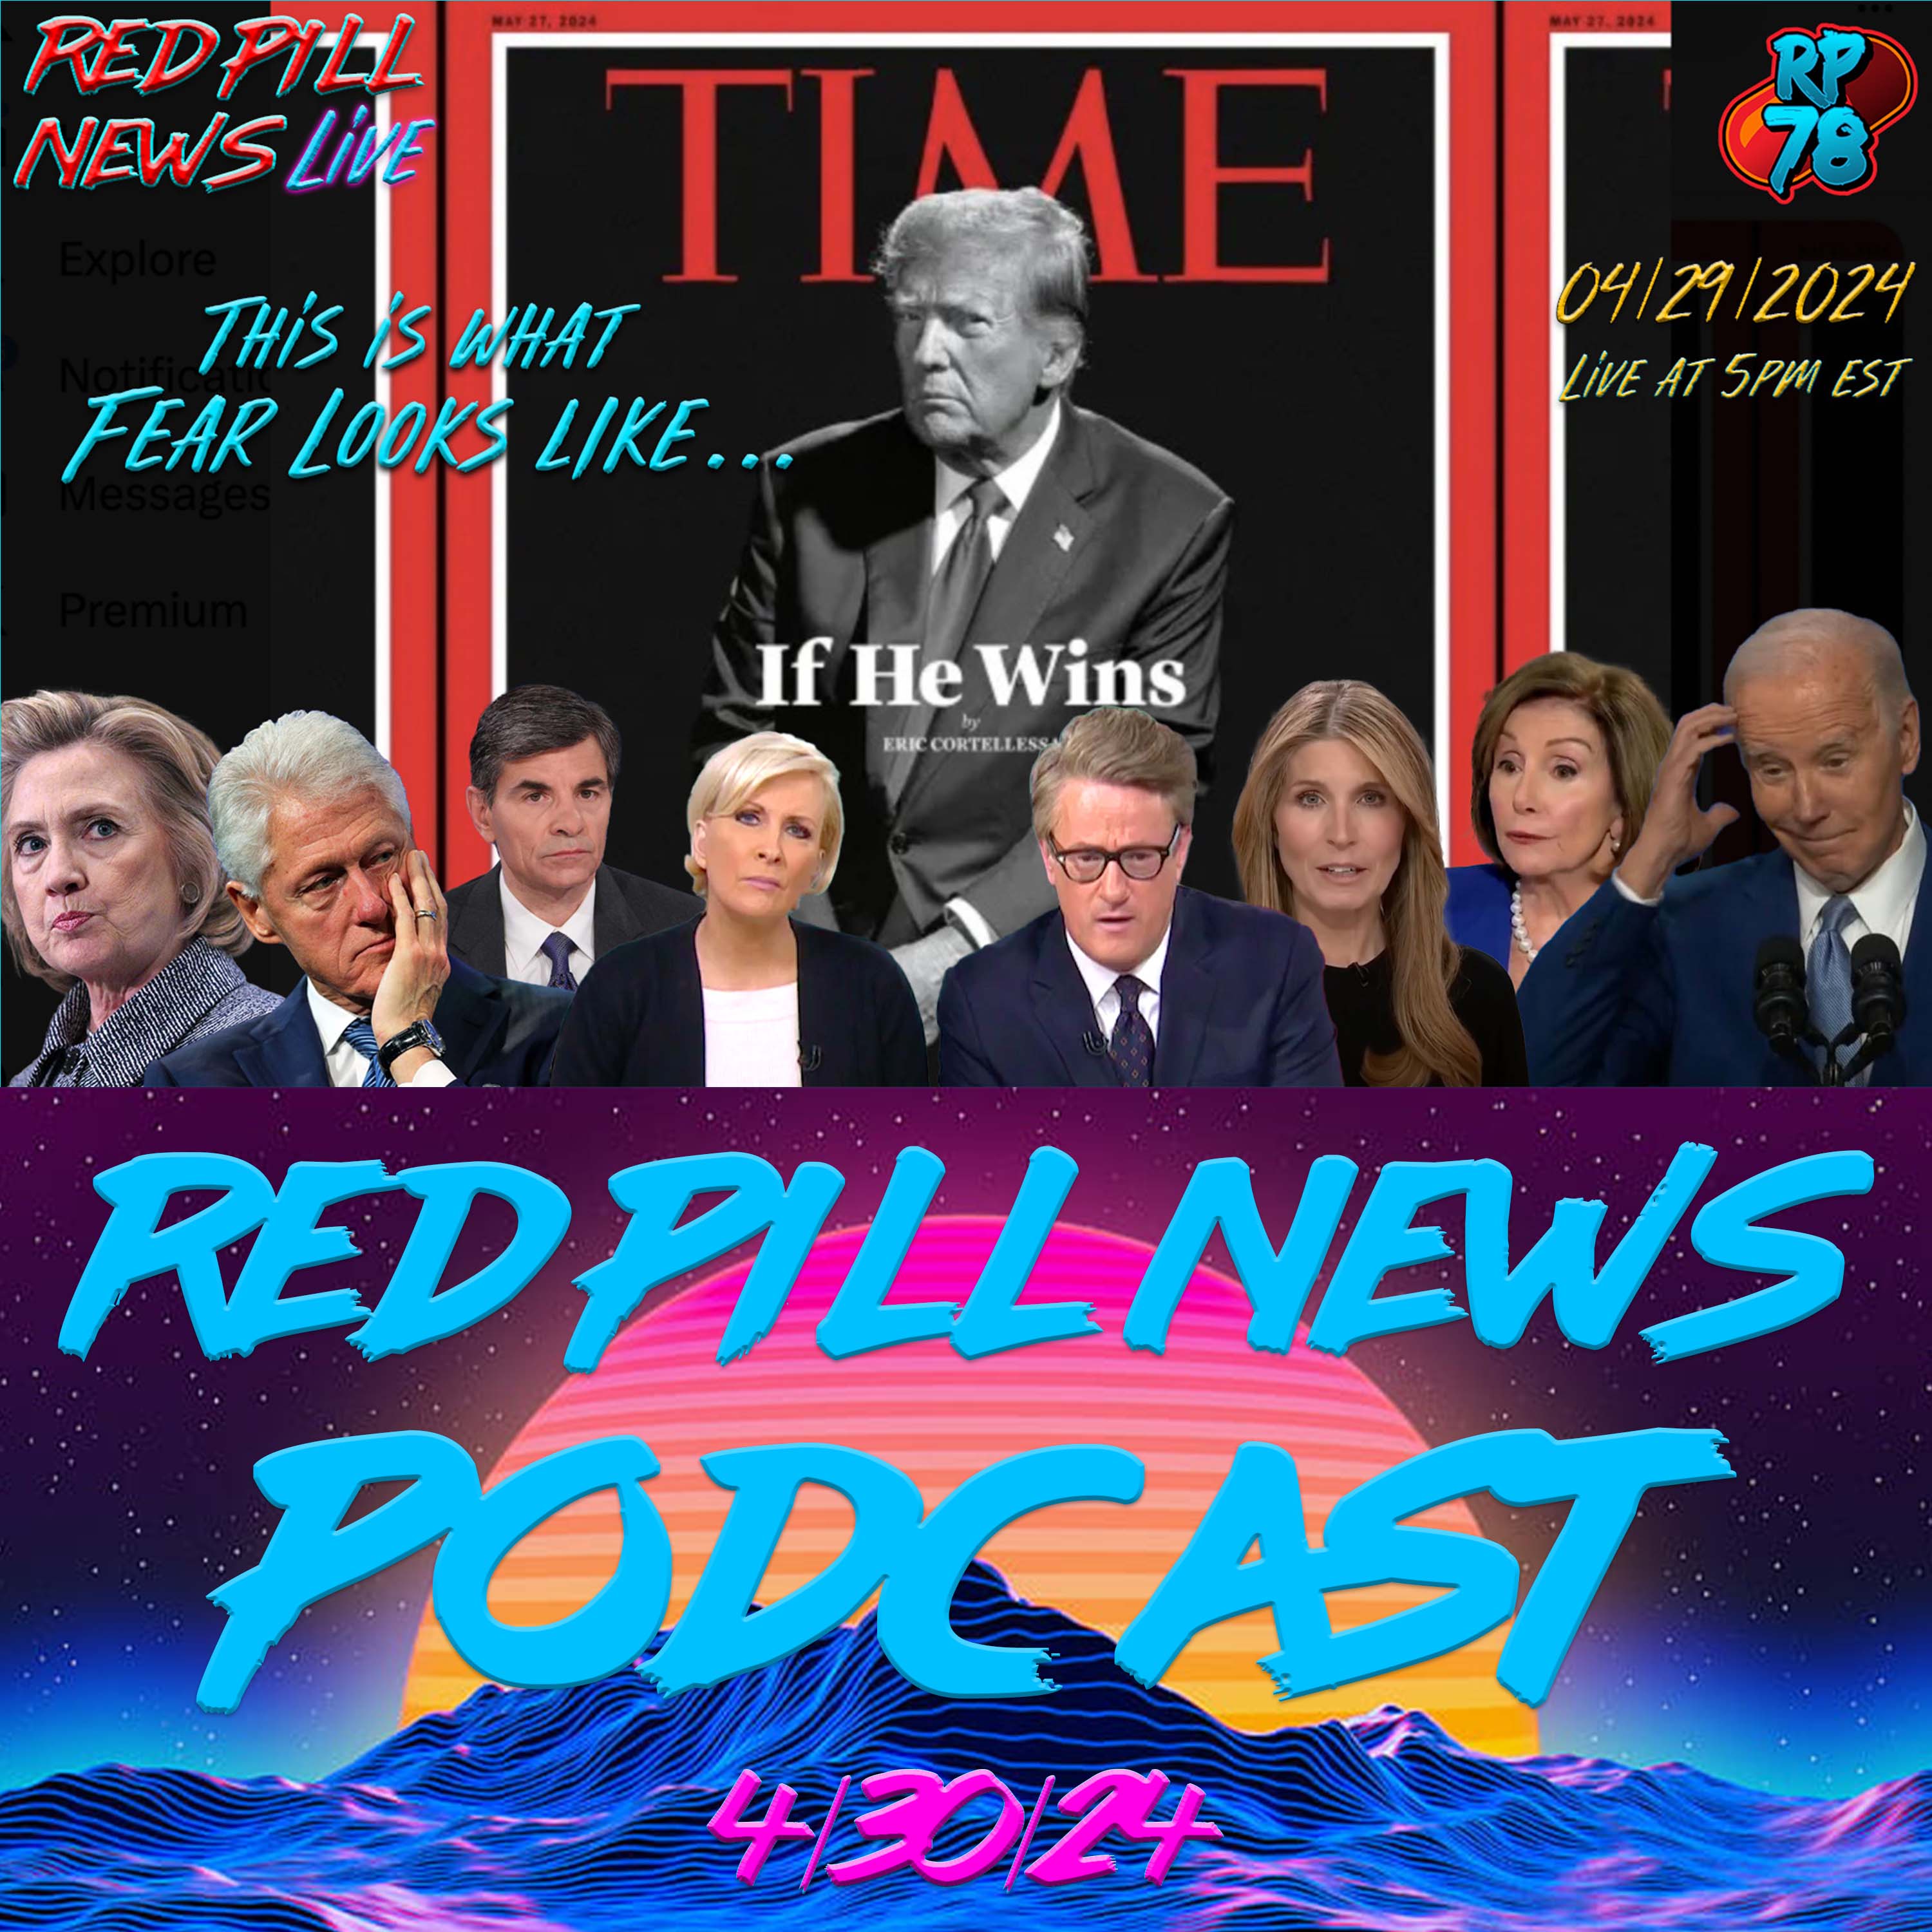 The Scent of Fear & the Thrill of Victory on Red Pill News Live